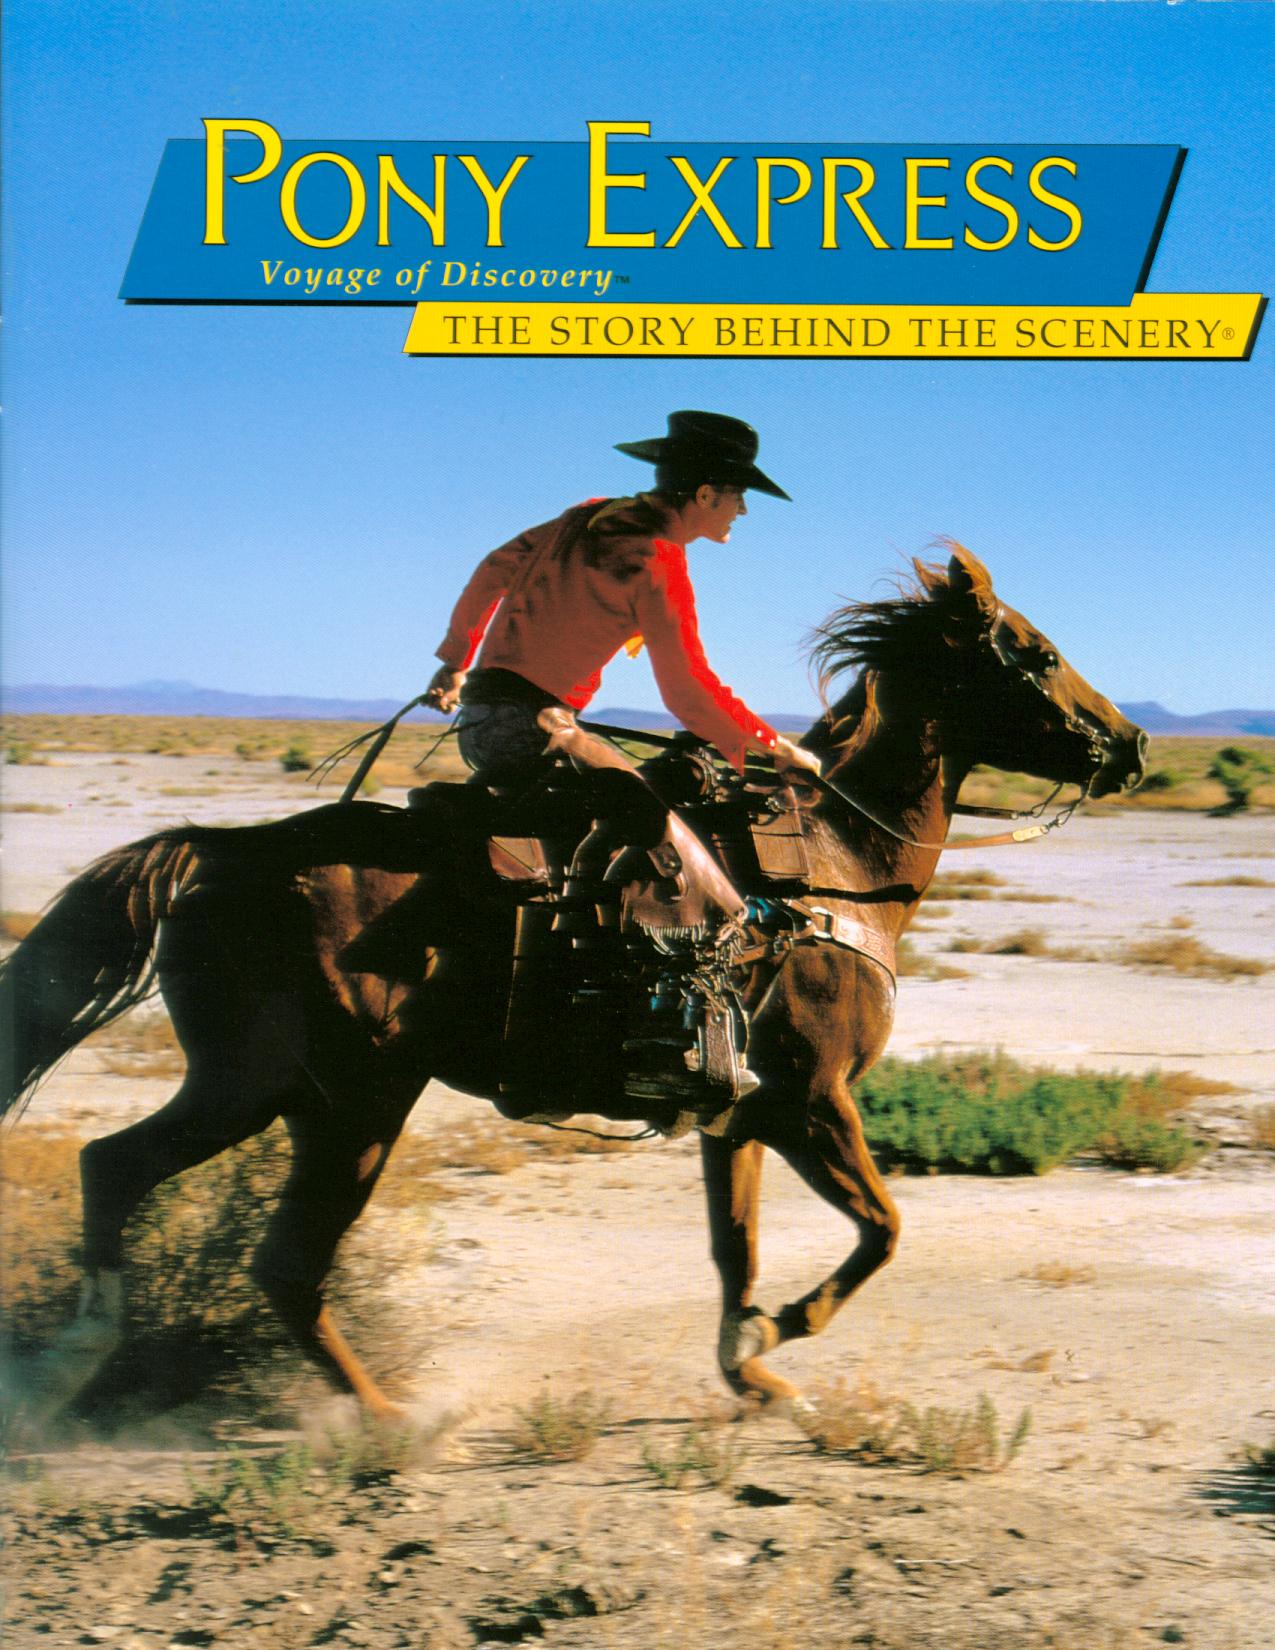 PONY EXPRESS: the story behind the scenery--voyage of discovery. 